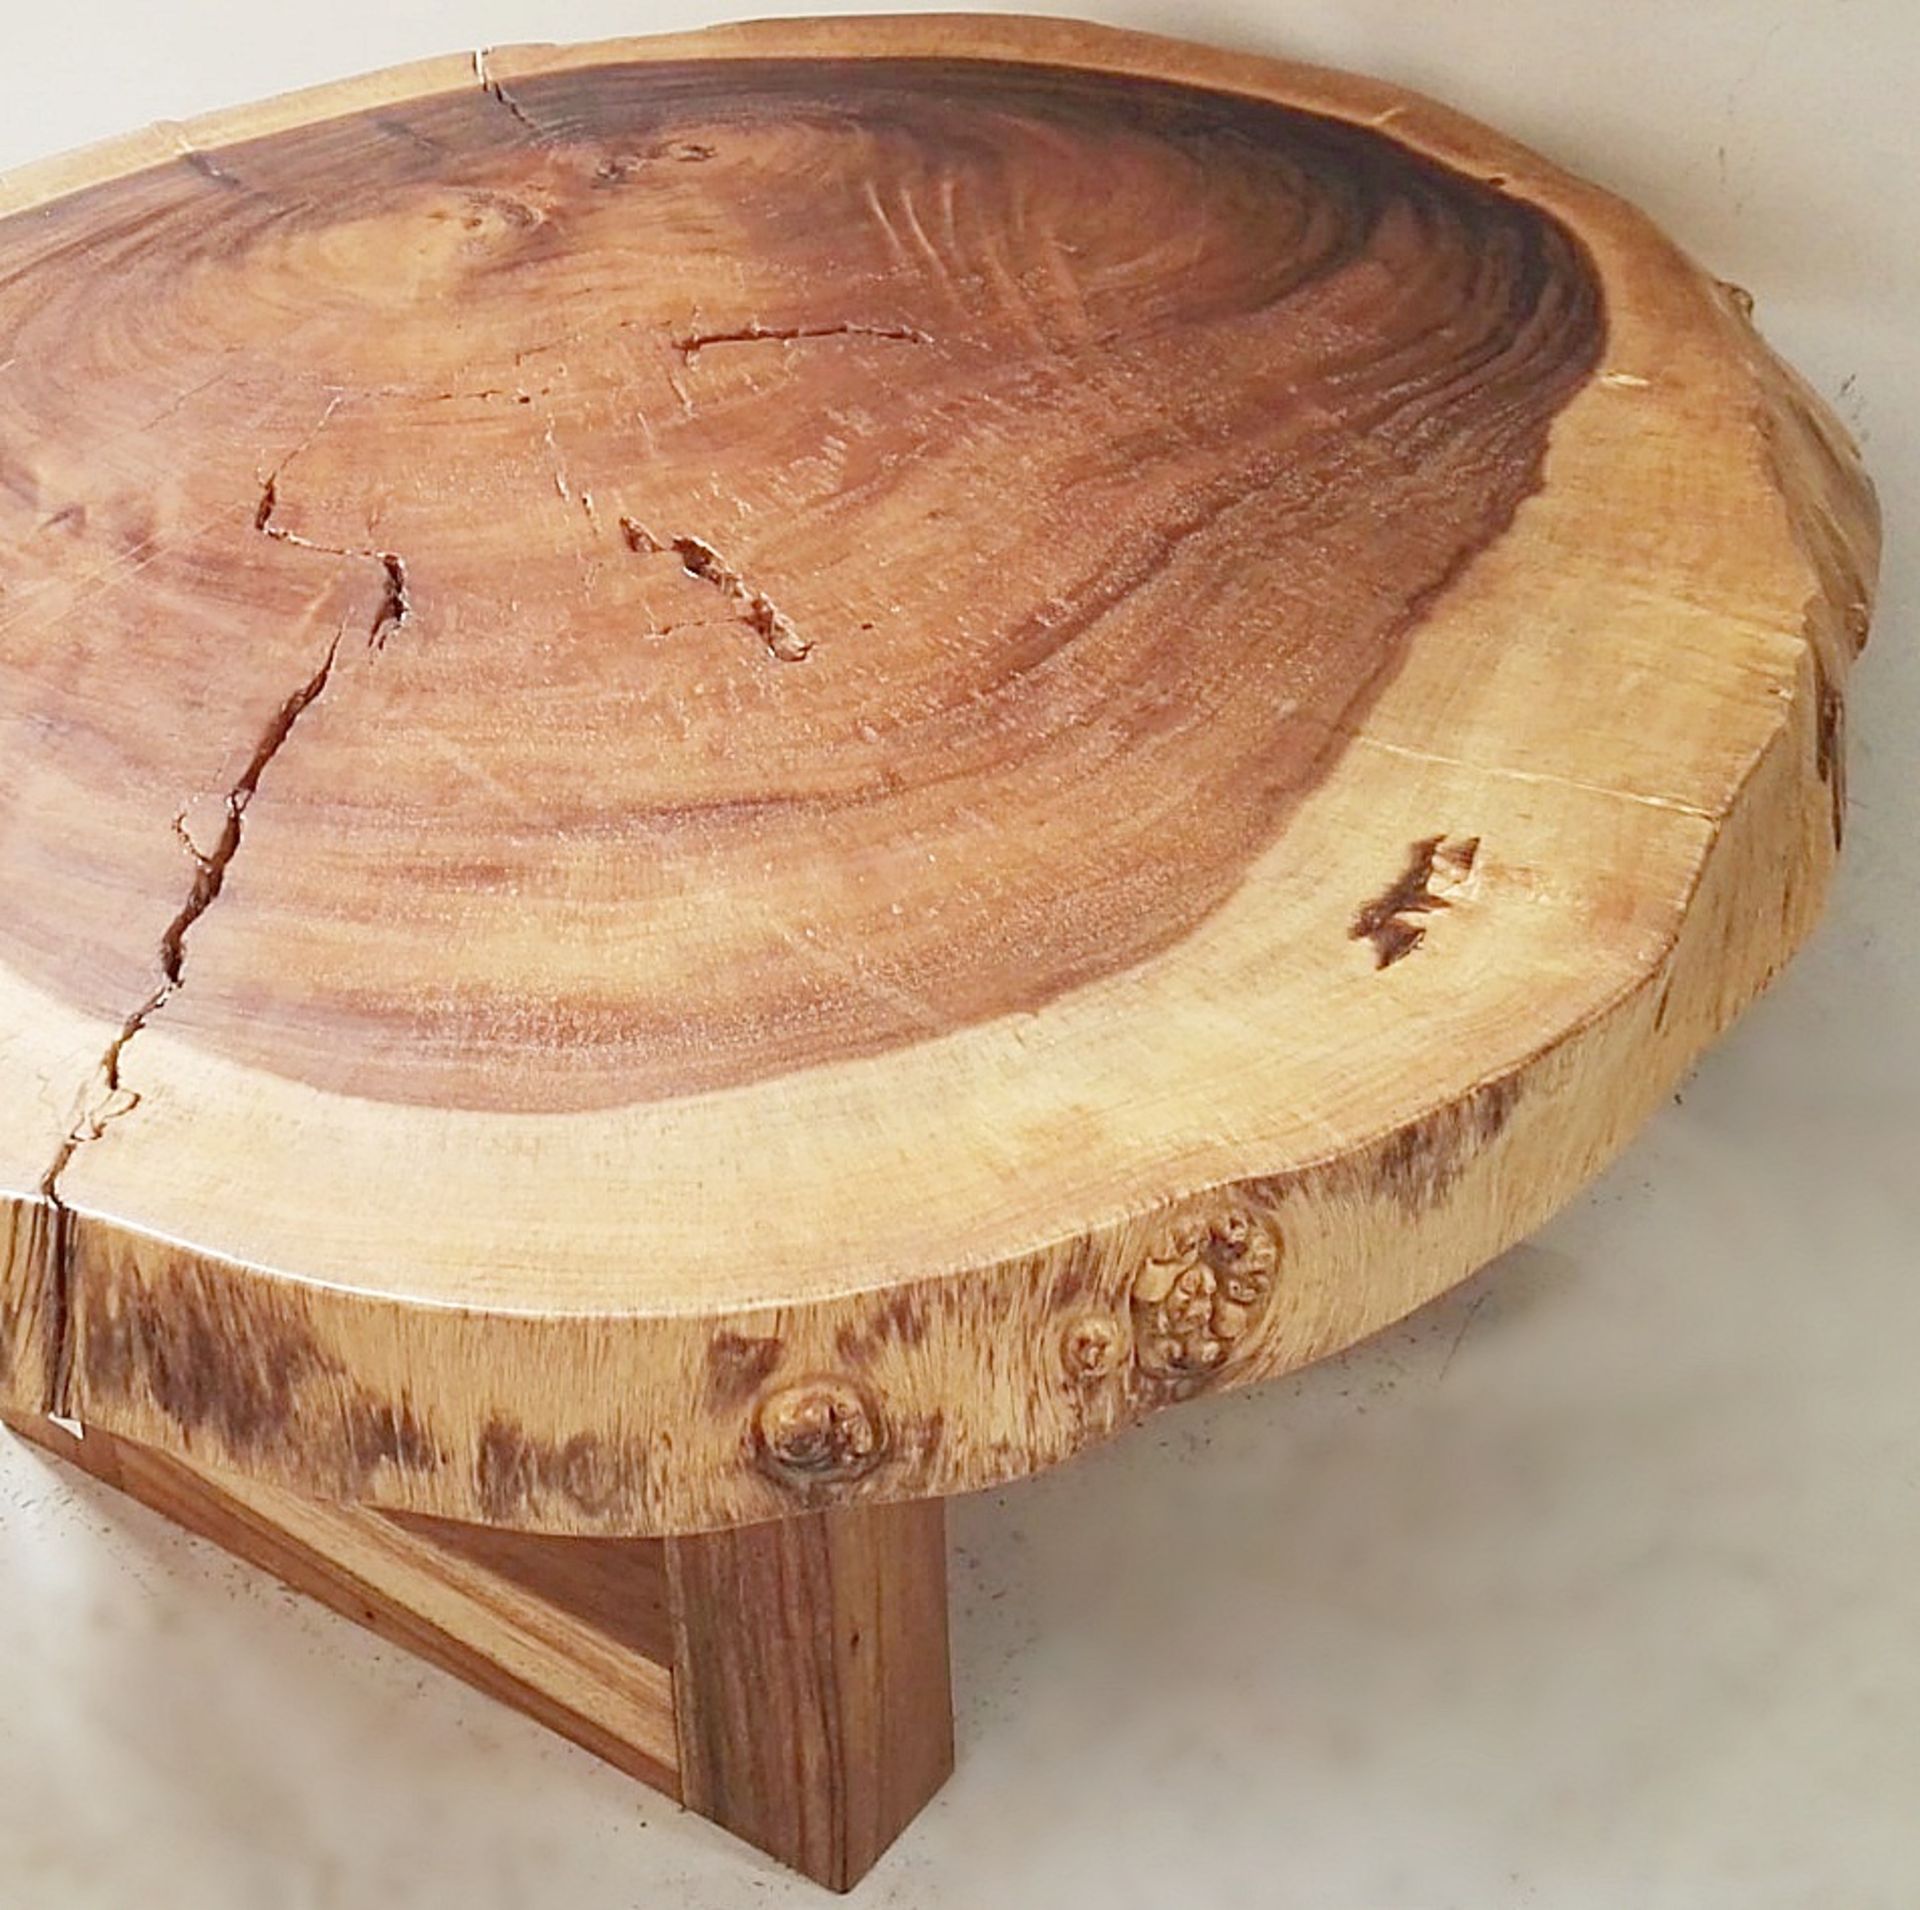 1 x Unique Reclaimed Solid Tree Trunk Coffee Table With Square Base - Image 2 of 5